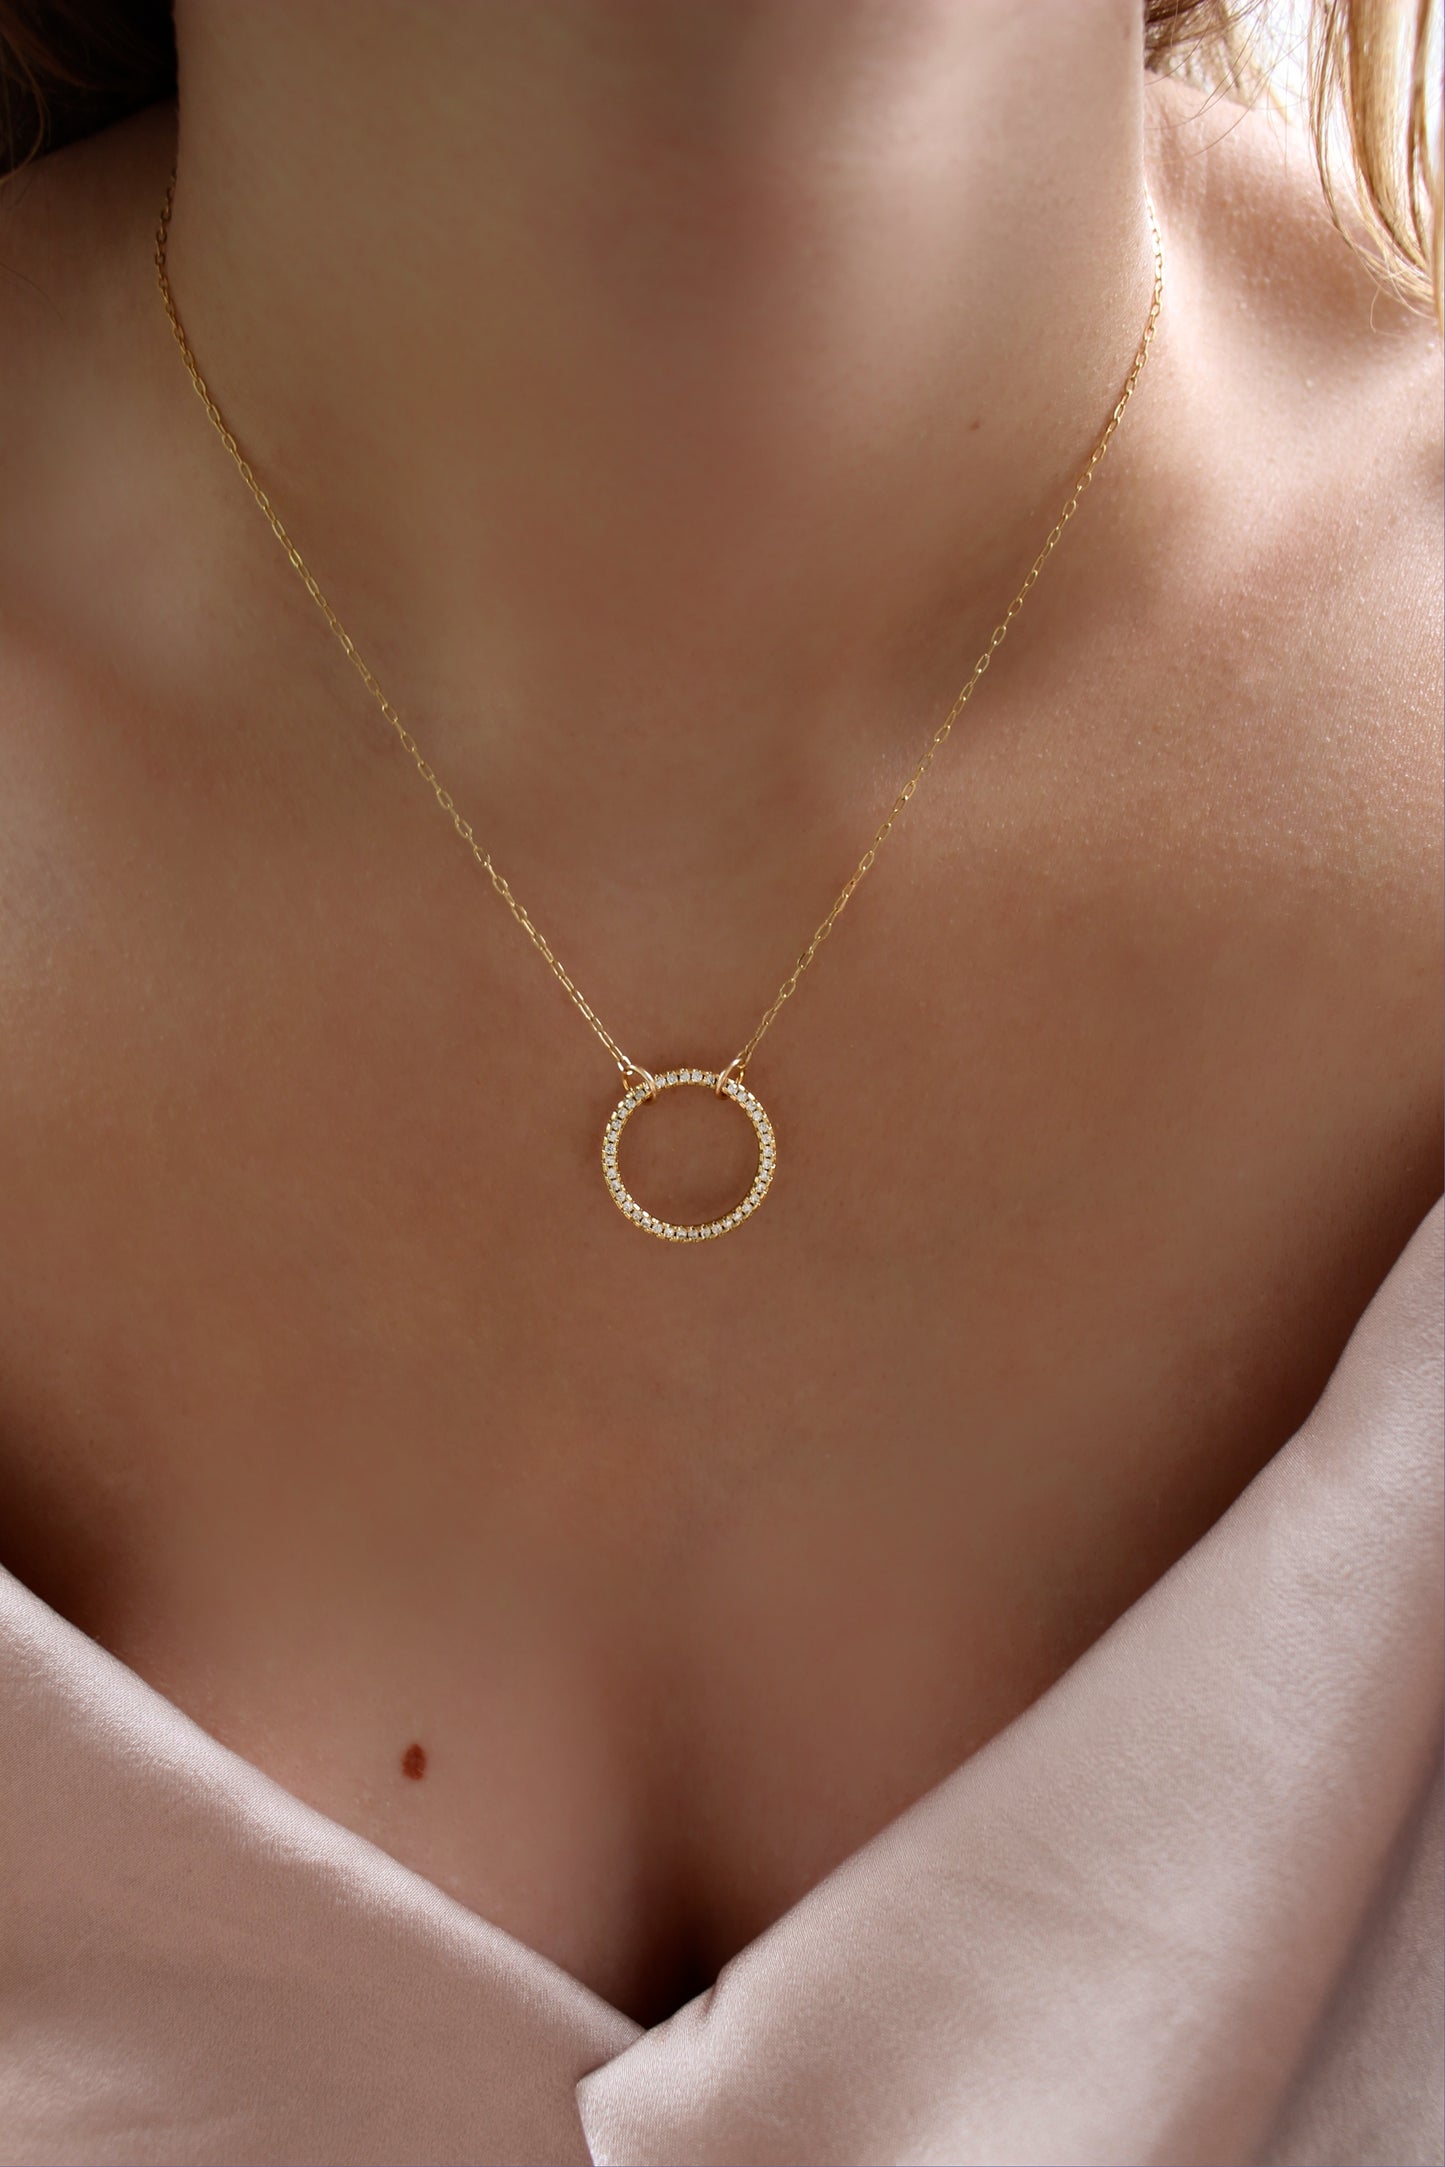 ORIELLE - 14K Gold Fill Rhinestone Necklace ∙ Gold necklace for woman ∙ Dainty Gold Circle ∙ Minimalist Necklace ∙ Shiny Necklace